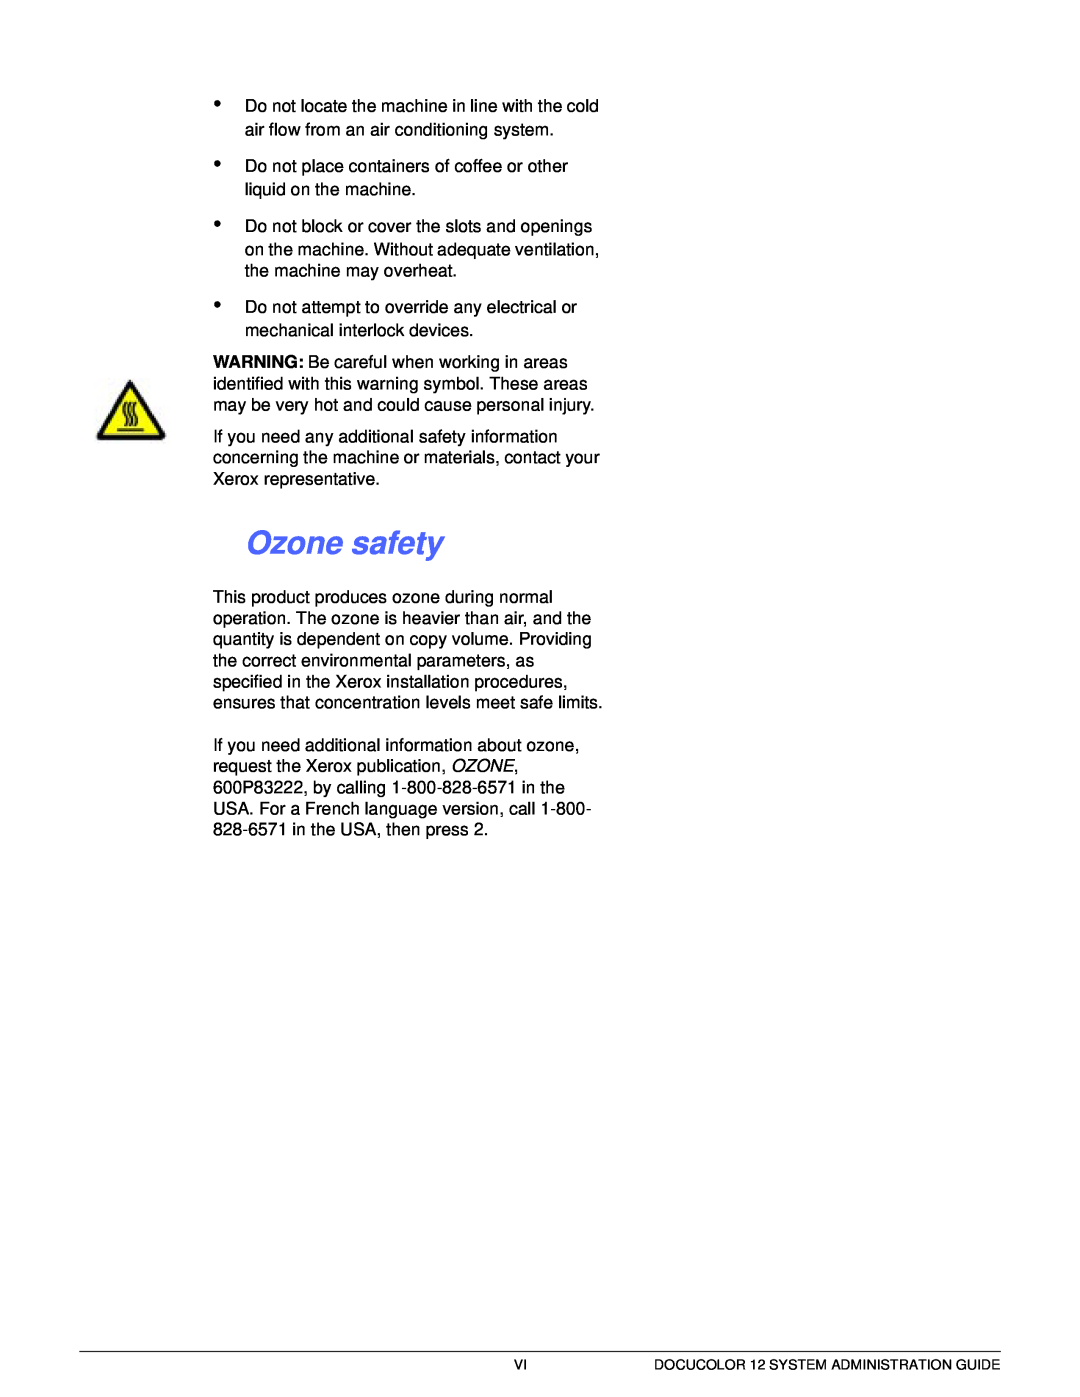 Xerox a2 manual Ozone safety, 1 2 3 4 5 6 7, DOCUCOLOR 12 SYSTEM ADMINISTRATION GUIDE 